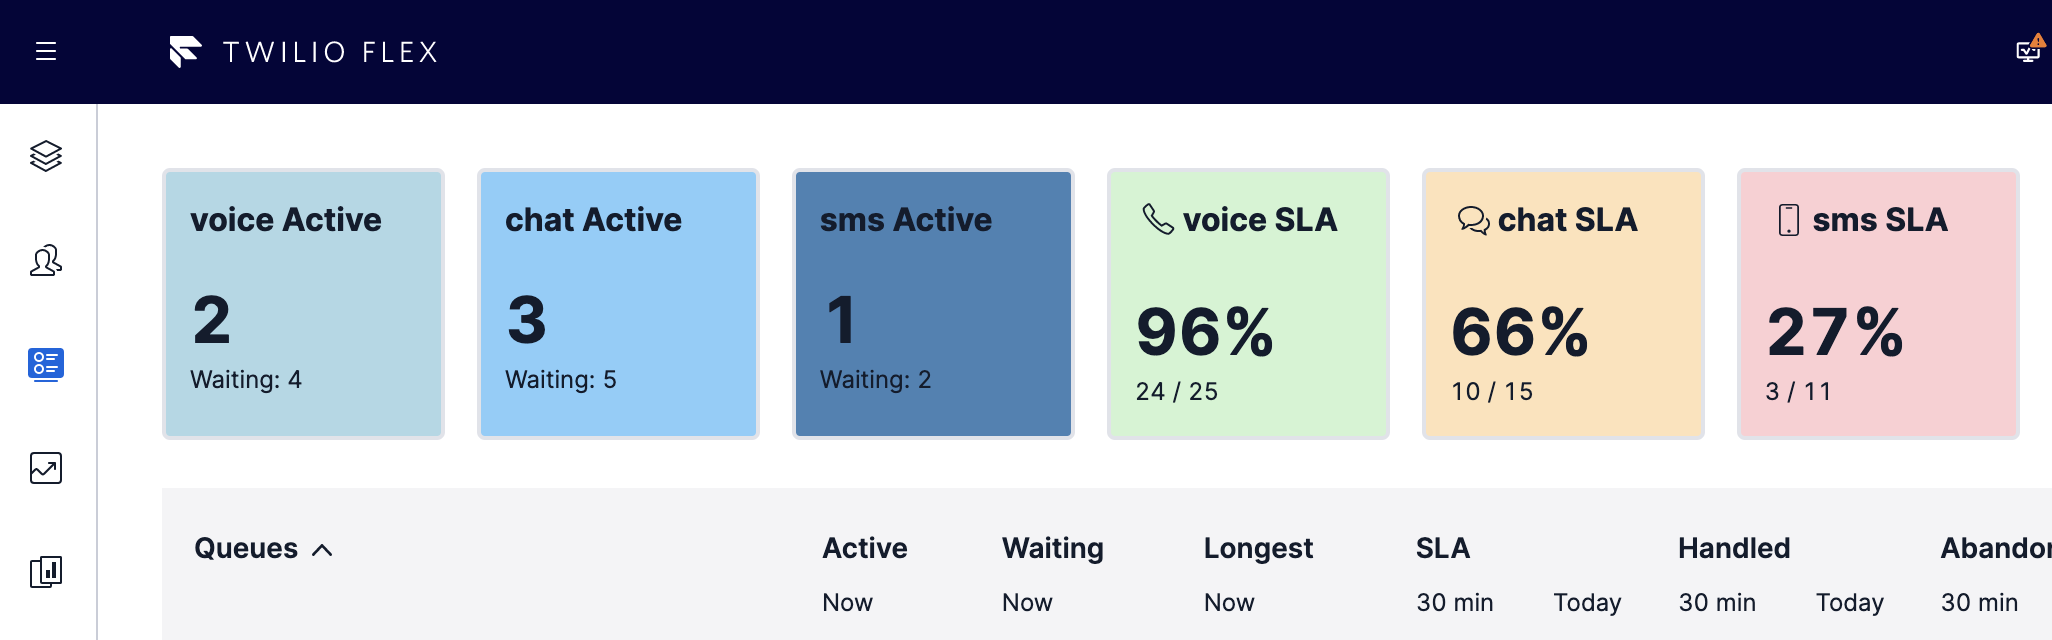 Image of six queues including voice Active, chat Active, sms, Active, voice SLA, chat, SLA, and SMS SLA, all in different colors for visual differentiation.